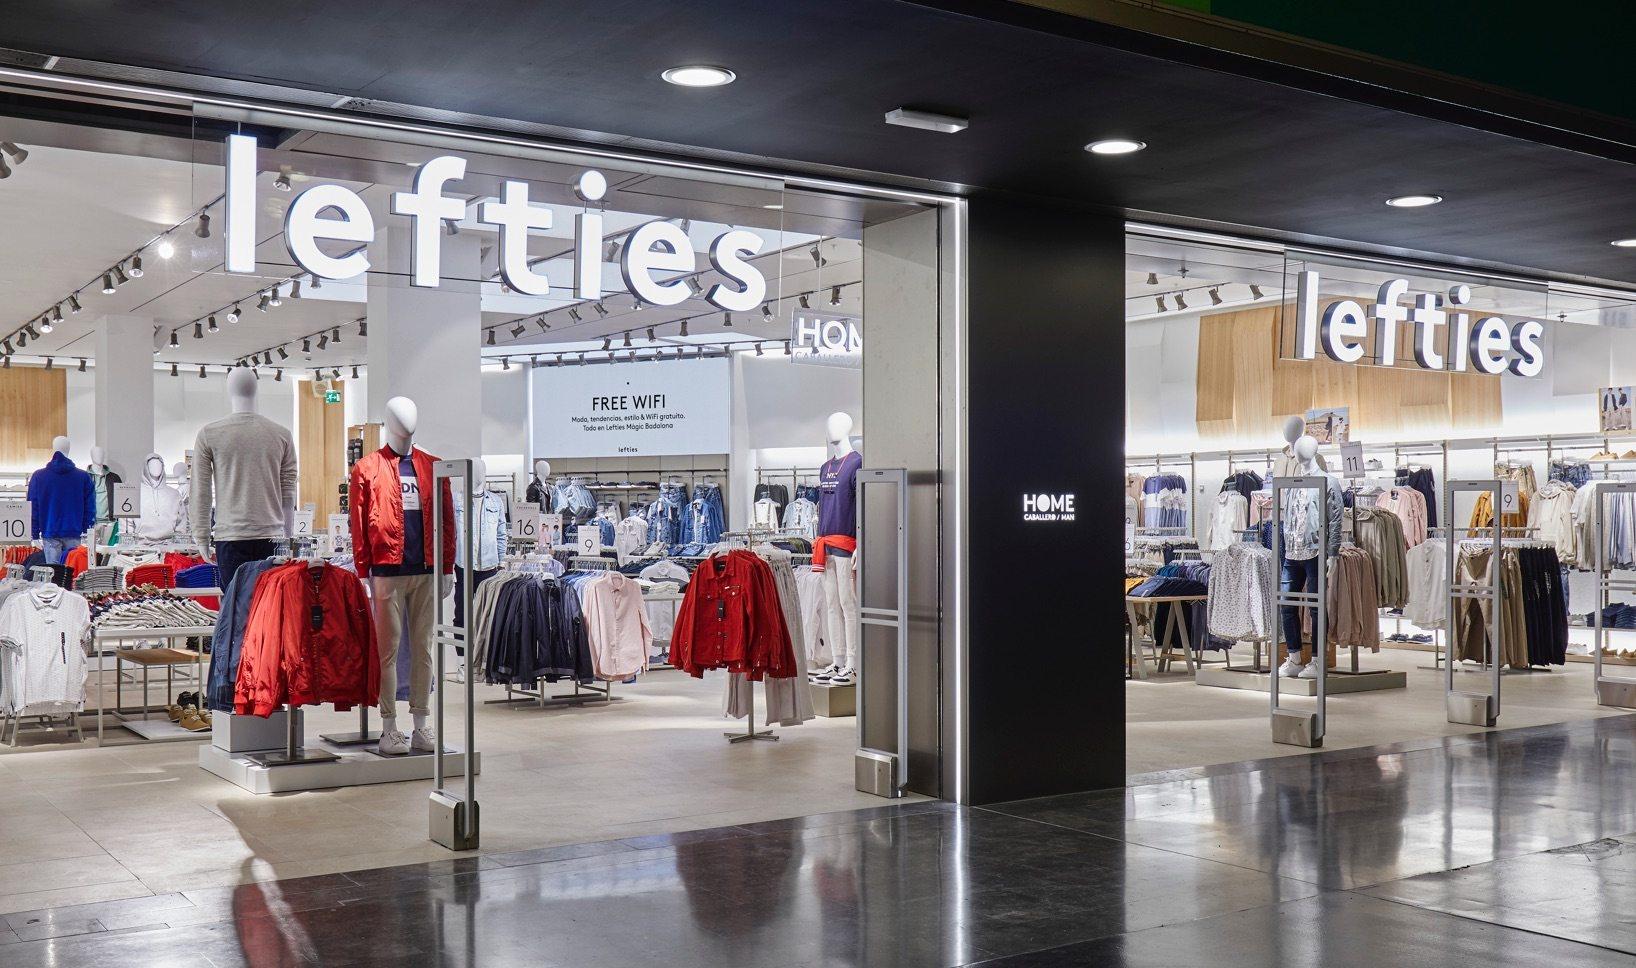 Ambitious to surpass Shein, Inditex expands its affordable fashion brand Lefties